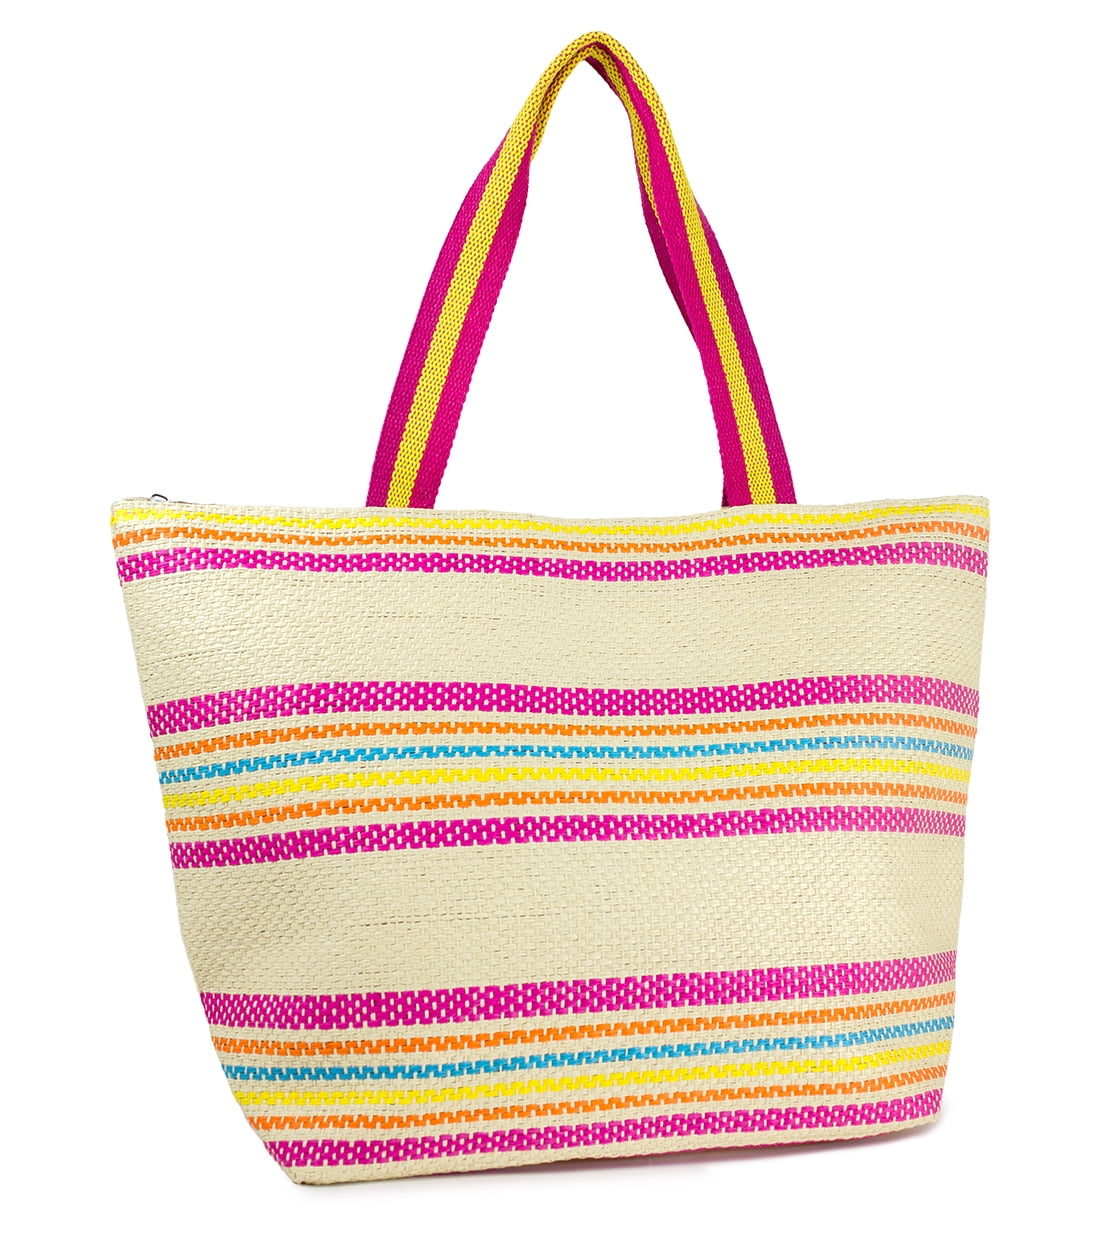 Grosgrain Stripe Beach Tote Bag Personalized Front Large